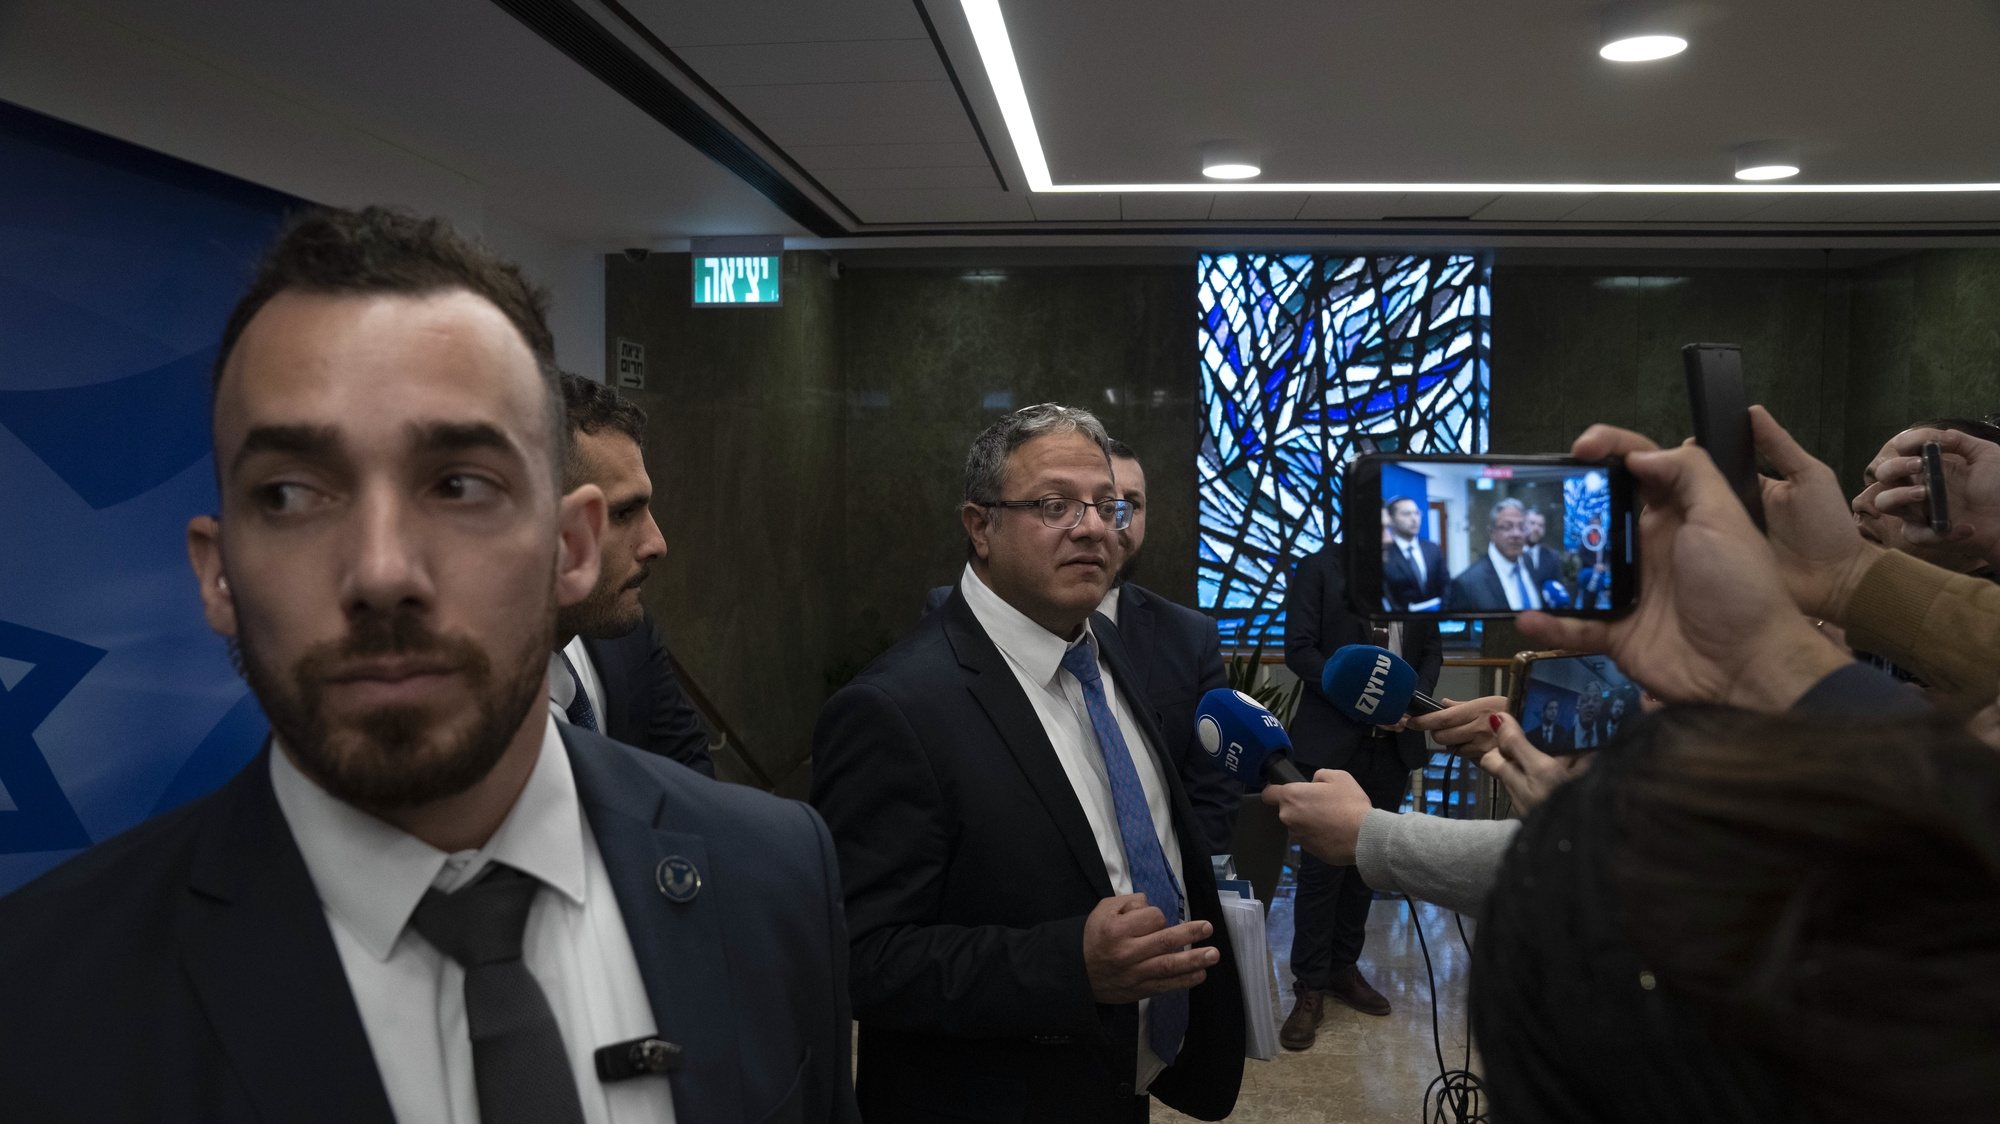 epa10422251 Israel’s Minister of National Security Itamar Ben-Gvir (C) speaks to journalists on arrival to the weekly cabinet meeting in Jerusalem, 22 January 2023. The Israeli Supreme Court ruled on 18 January 2023 that the appointment of Knesset member Rabbi Aryeh Makhlouf Deri to the position of Minister of the Interior and Health cannot stand. According to reports, the court ordered Prime Minister Benjamin Netanyahu to fire Deri from his post today.  EPA/Maya Alleruzzo / POOL